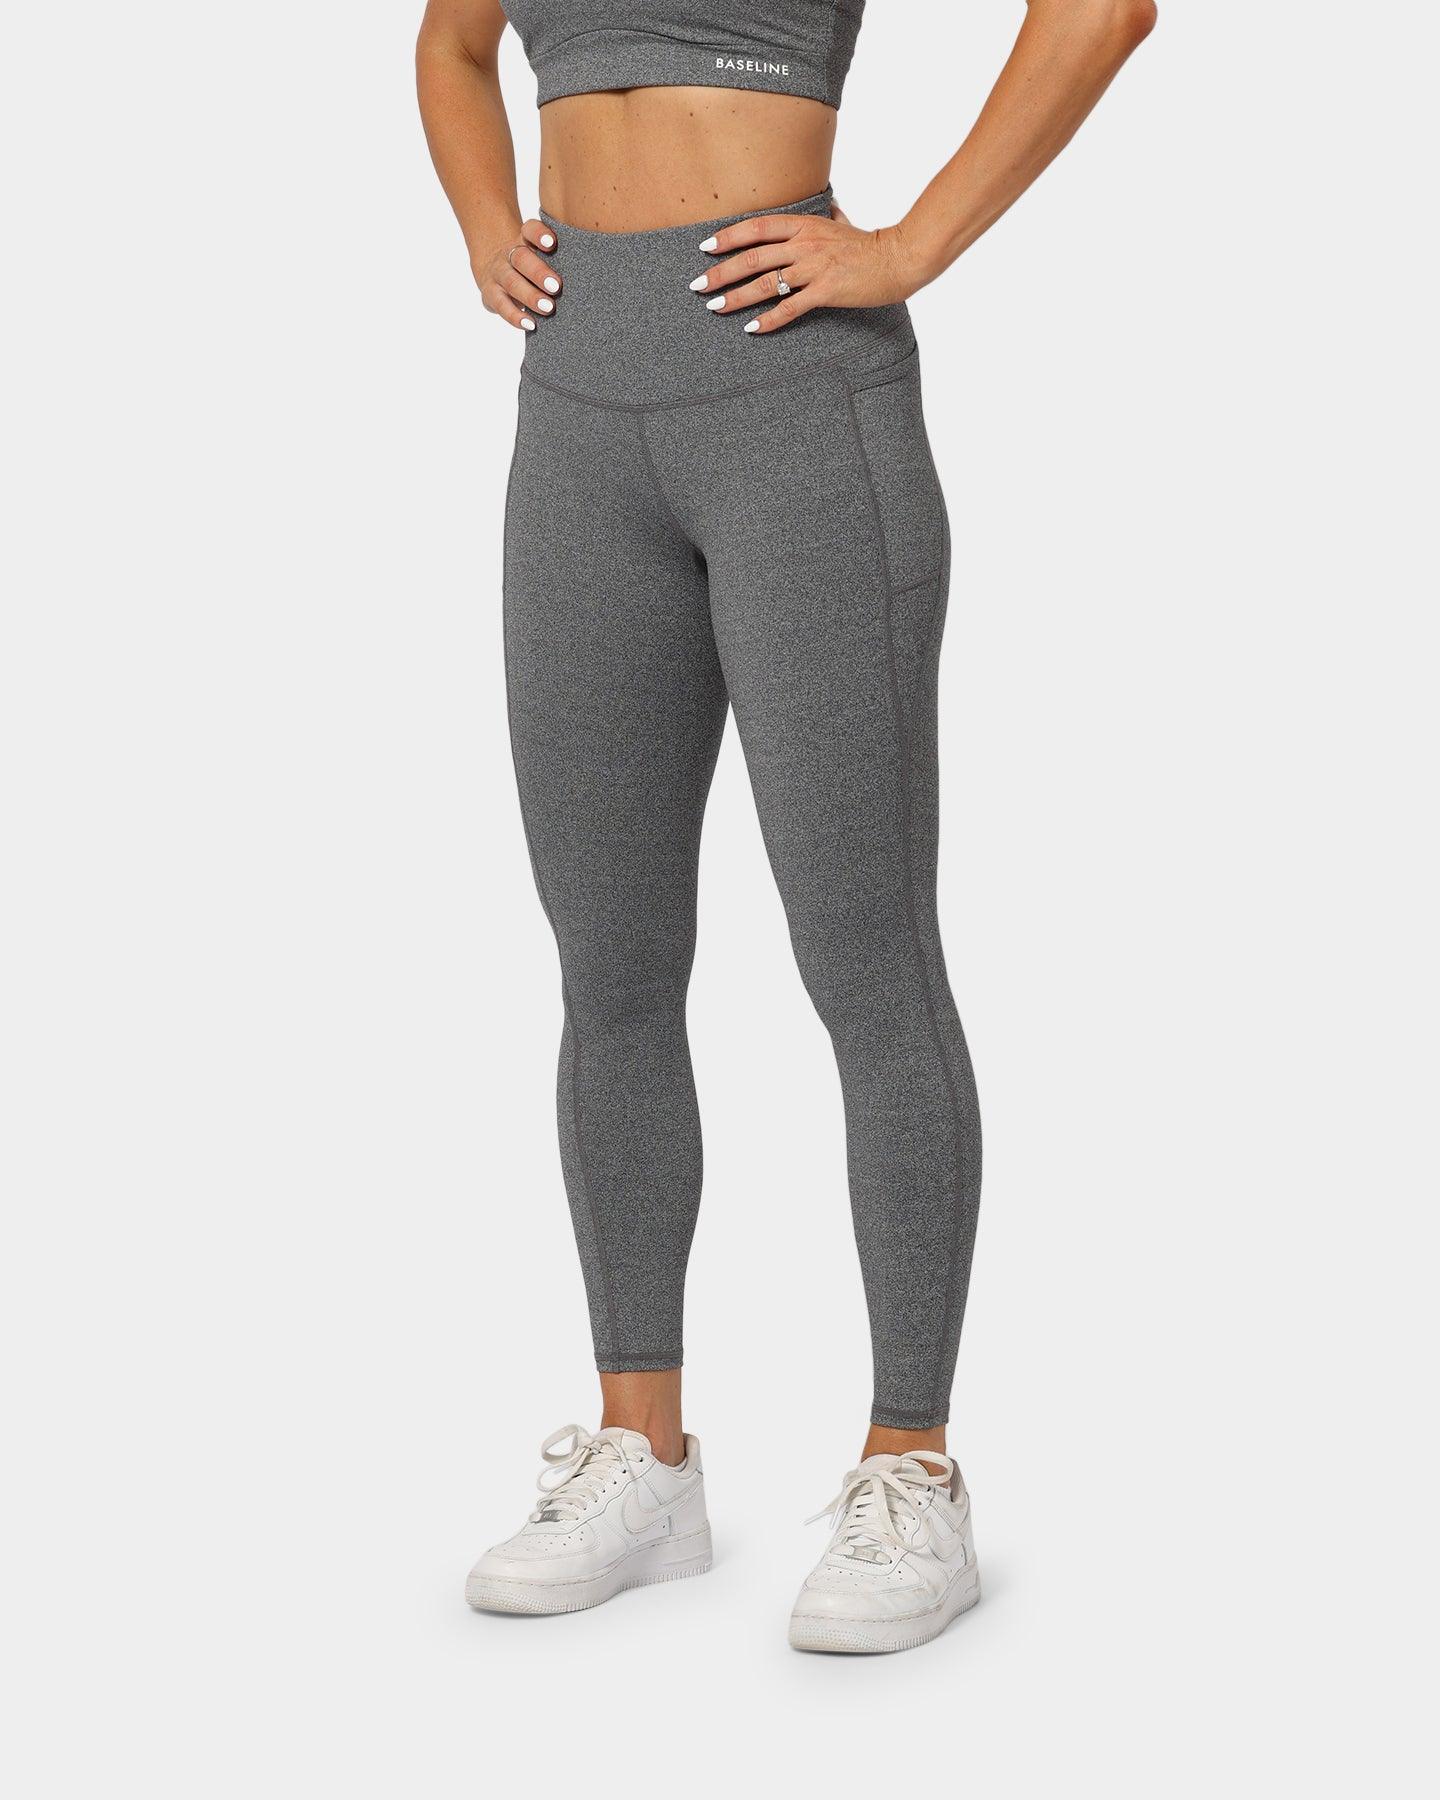 Women's Activewear Workout Clothes Old Navy, 44% OFF